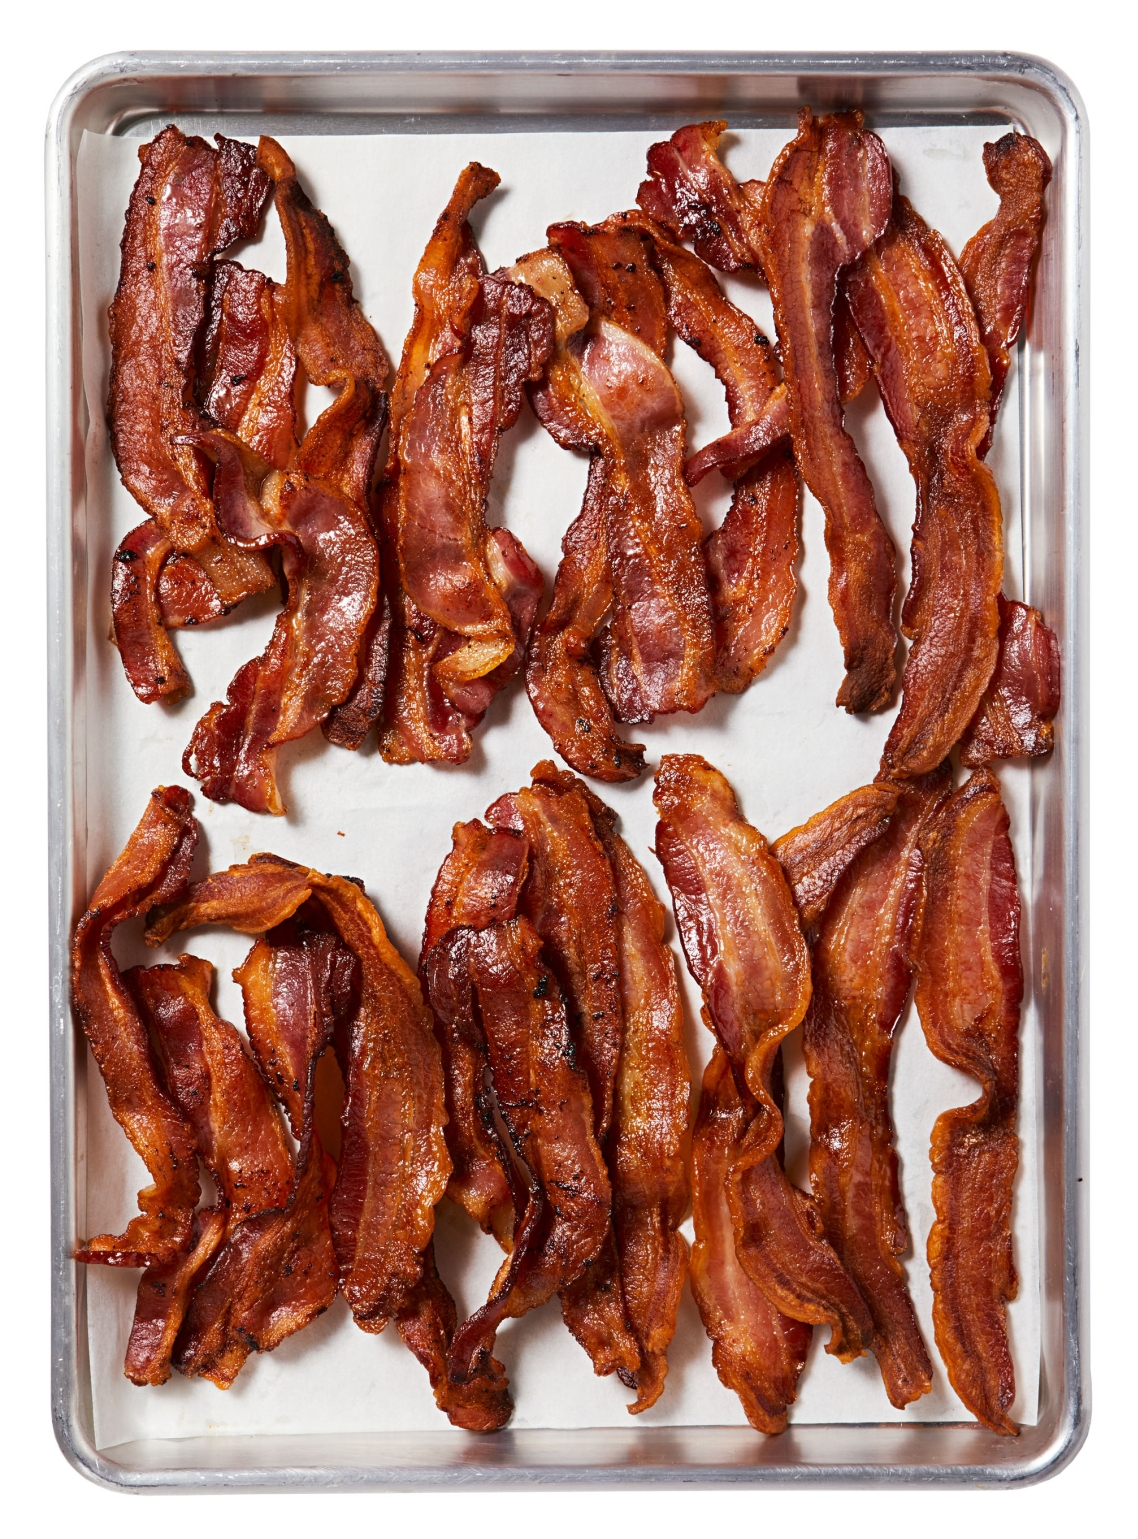 strips of bacon